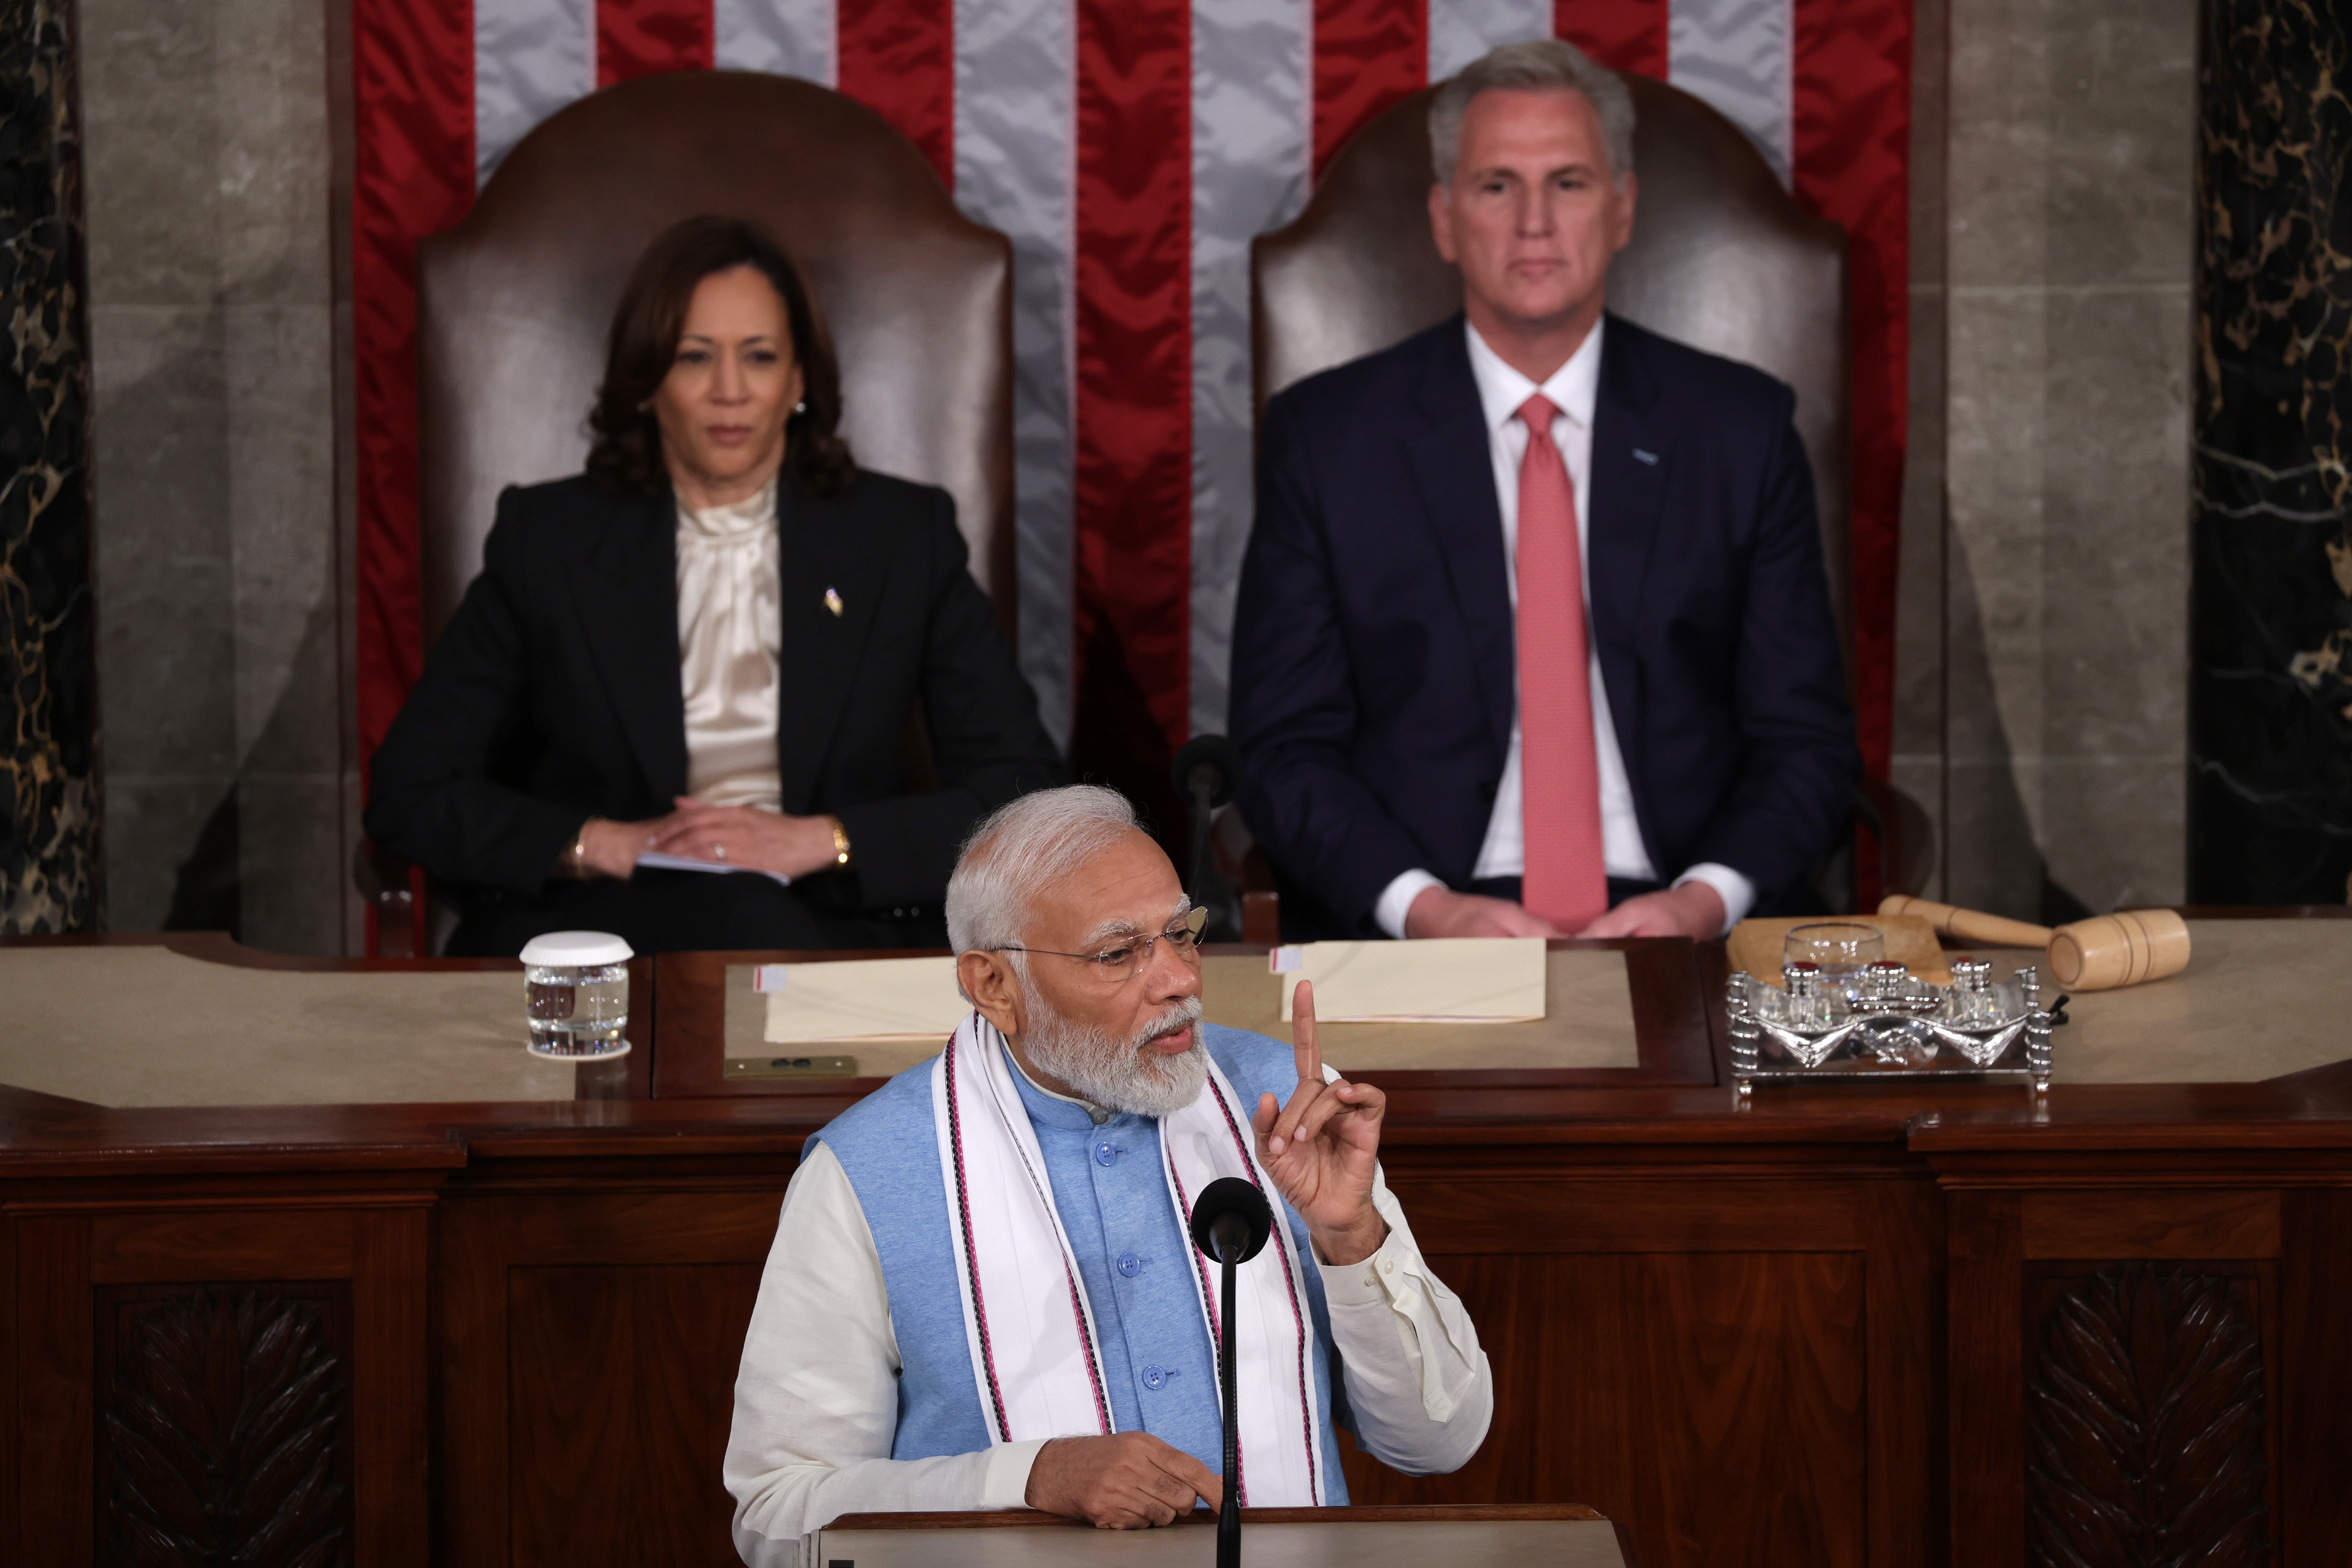 Indian Prime Minister Narendra Modi delivers remarks to a joint meeting of Congress at the U.S. Capitol on June 22, 2023